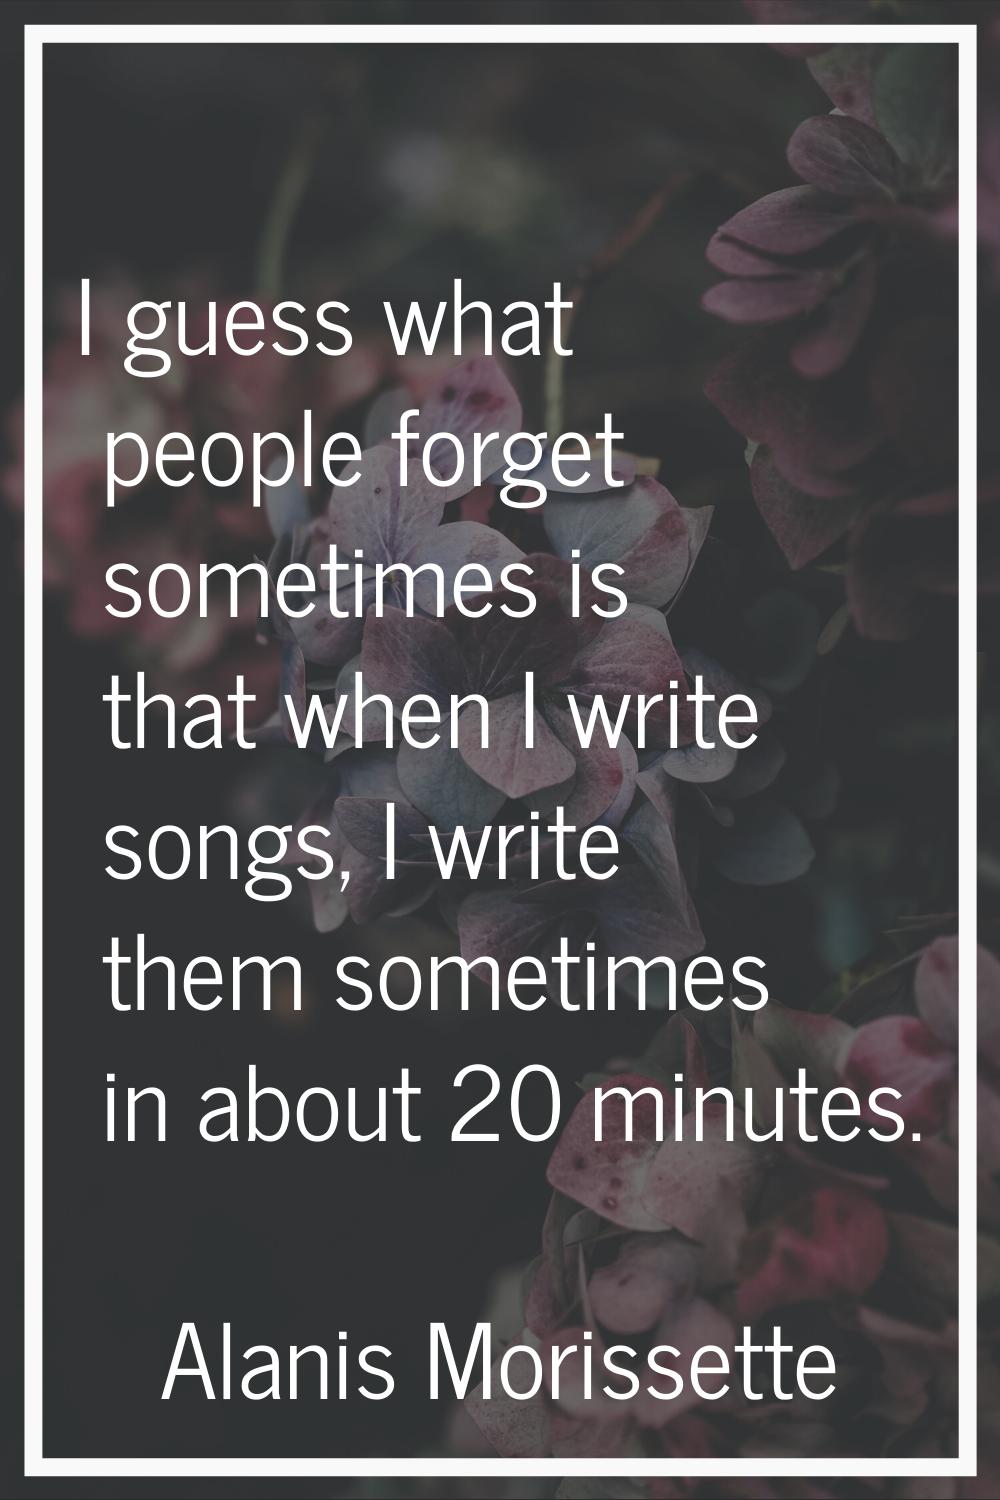 I guess what people forget sometimes is that when I write songs, I write them sometimes in about 20